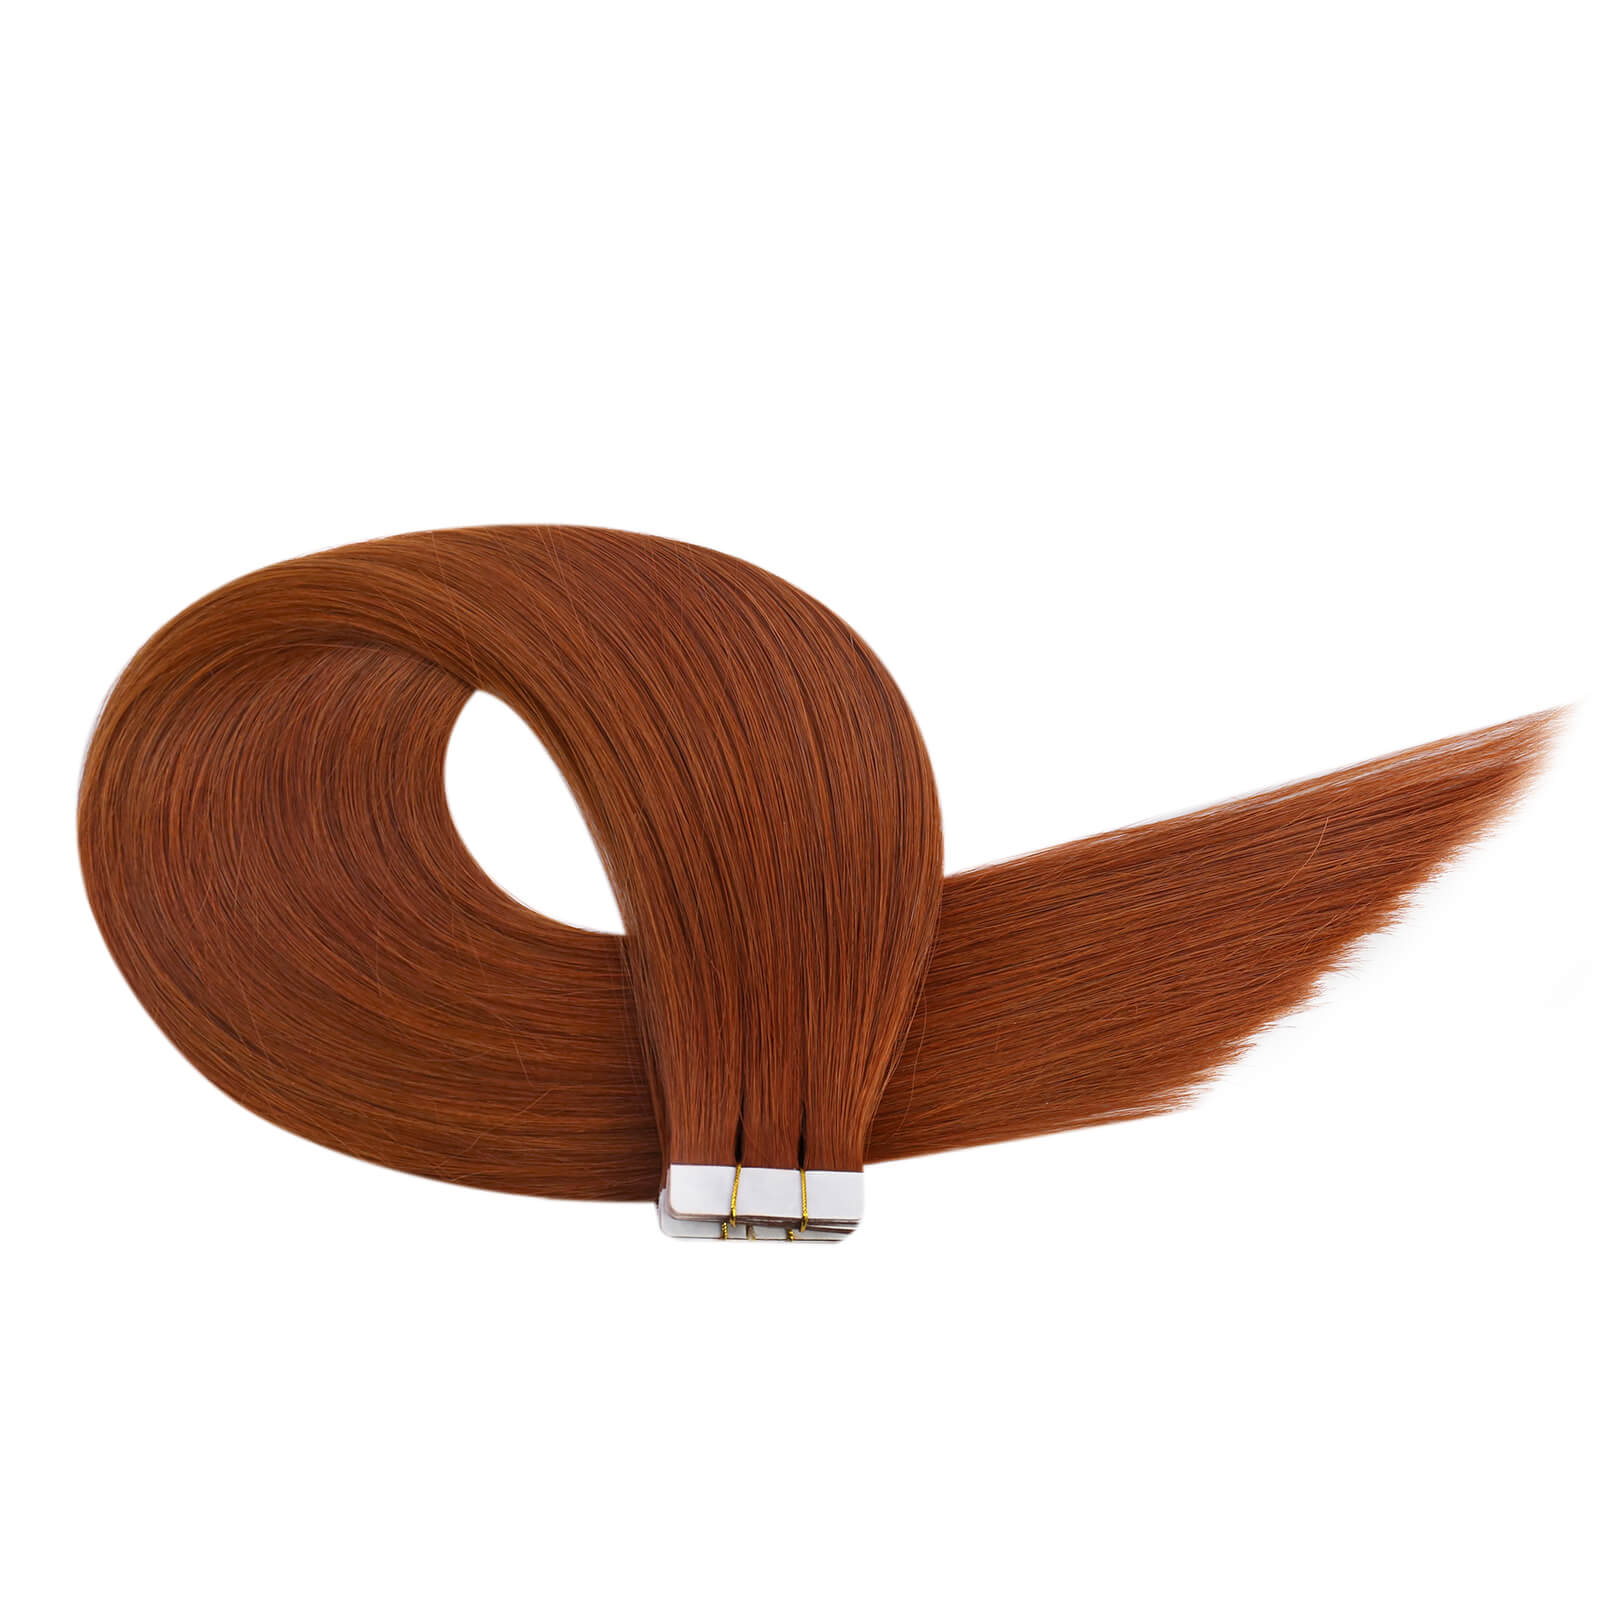 red hair extensions，tape in hair extensions, best tape in hair extensions, tape in extensions human hair, tape in human hair extensions,